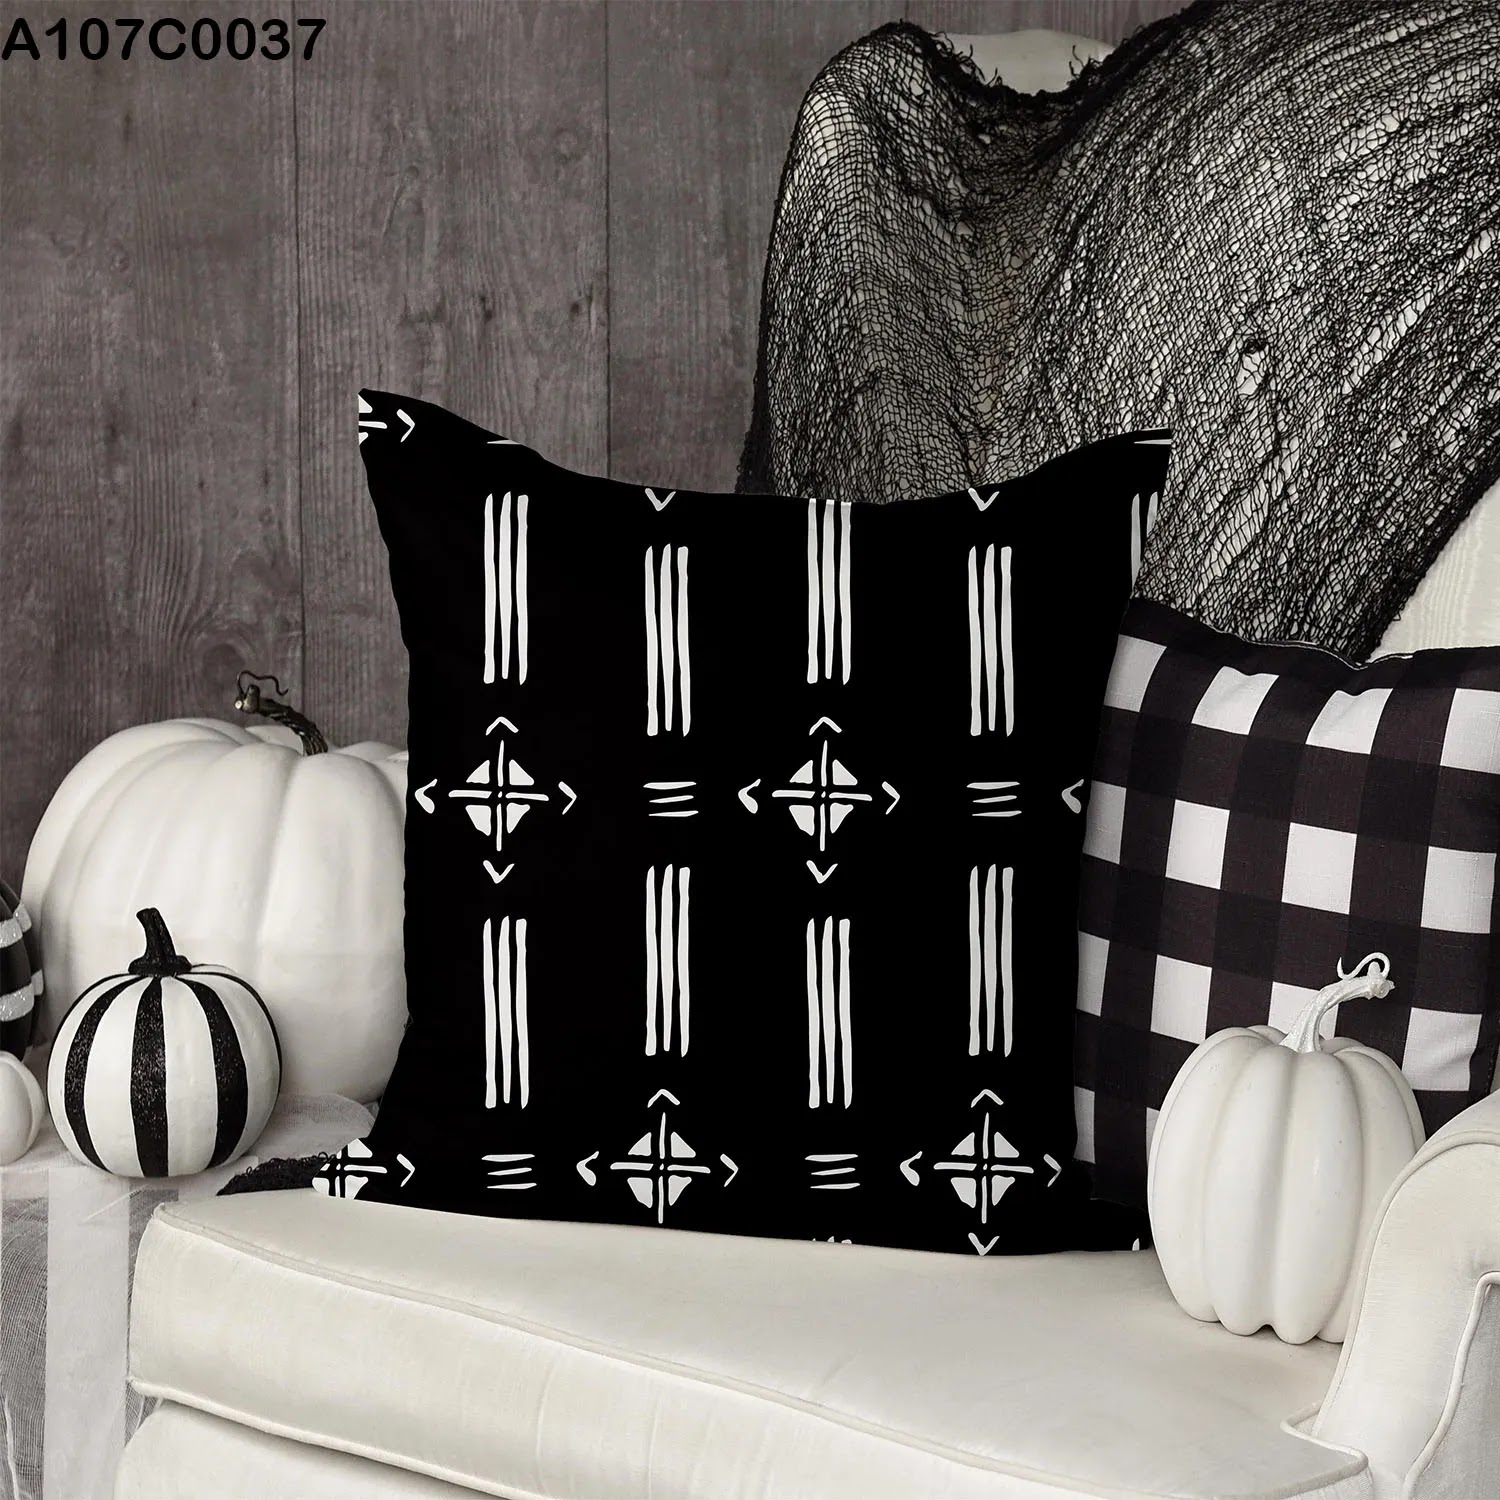 Black pillow case with white lines and shpaes